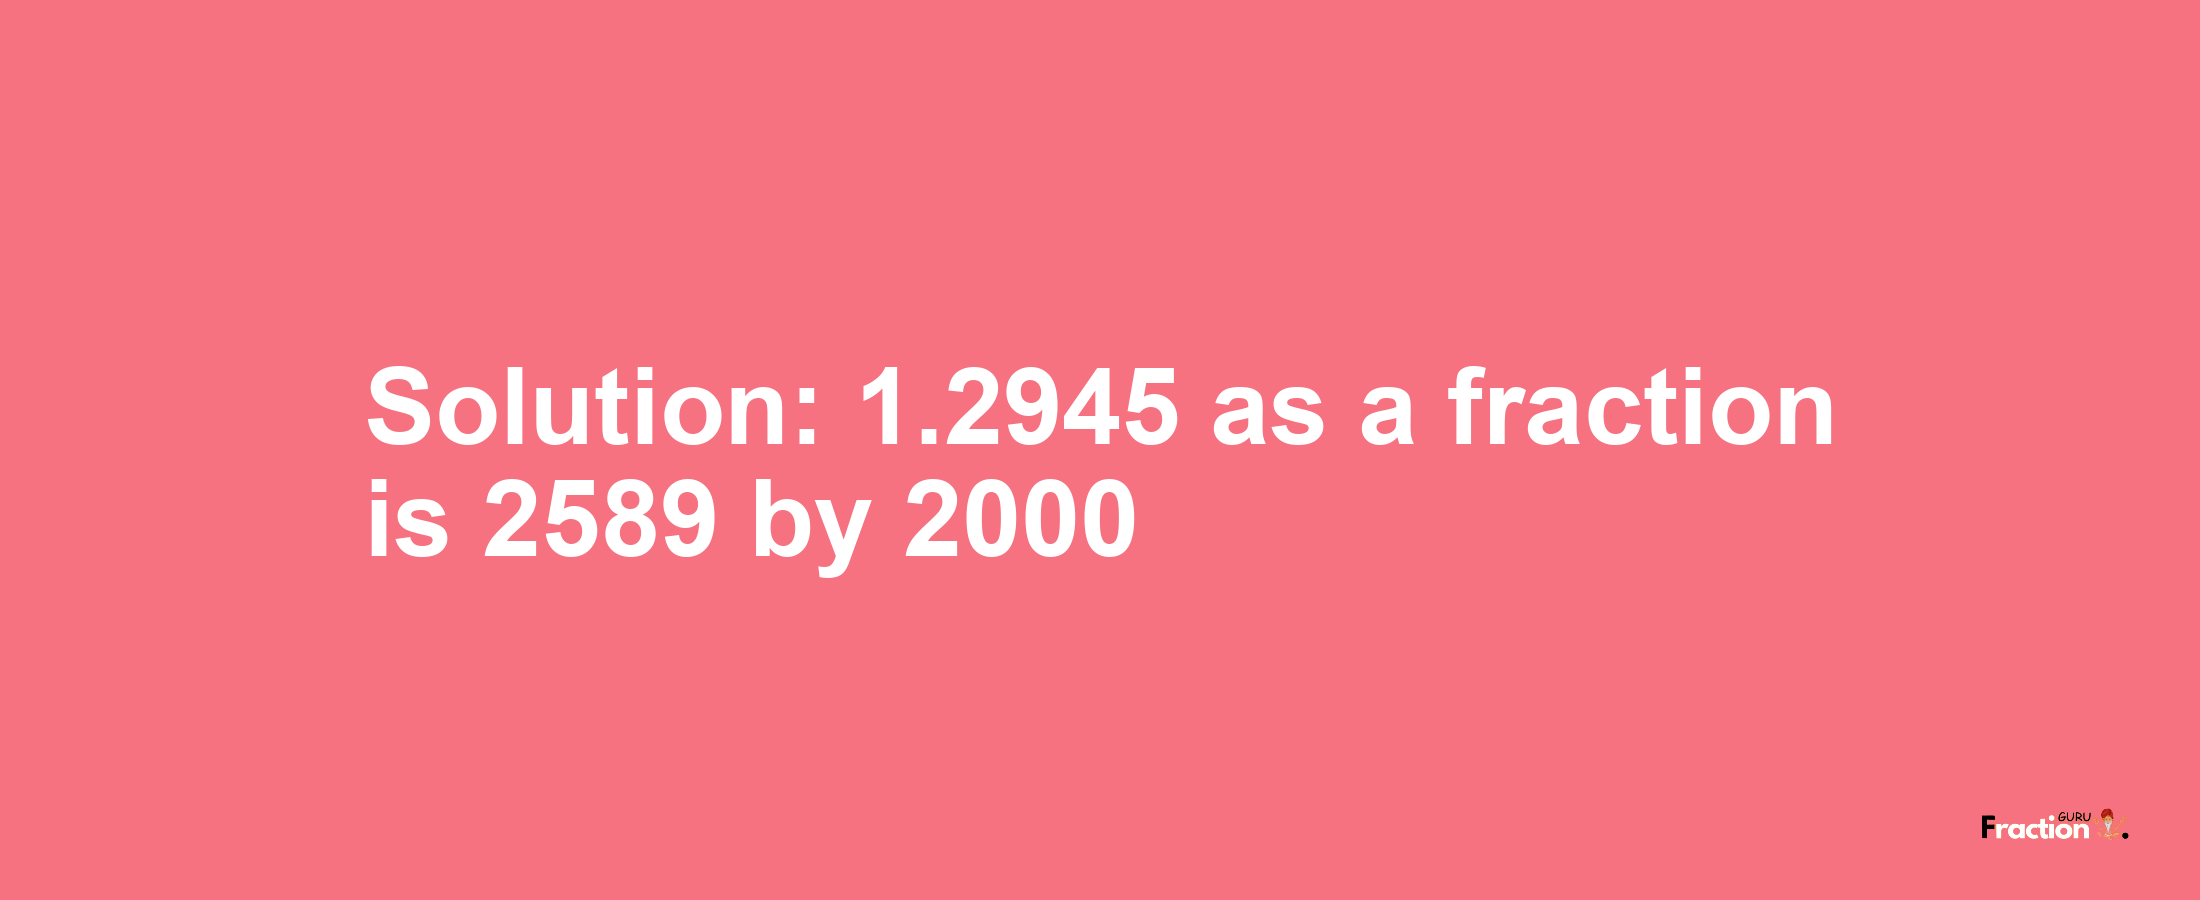 Solution:1.2945 as a fraction is 2589/2000